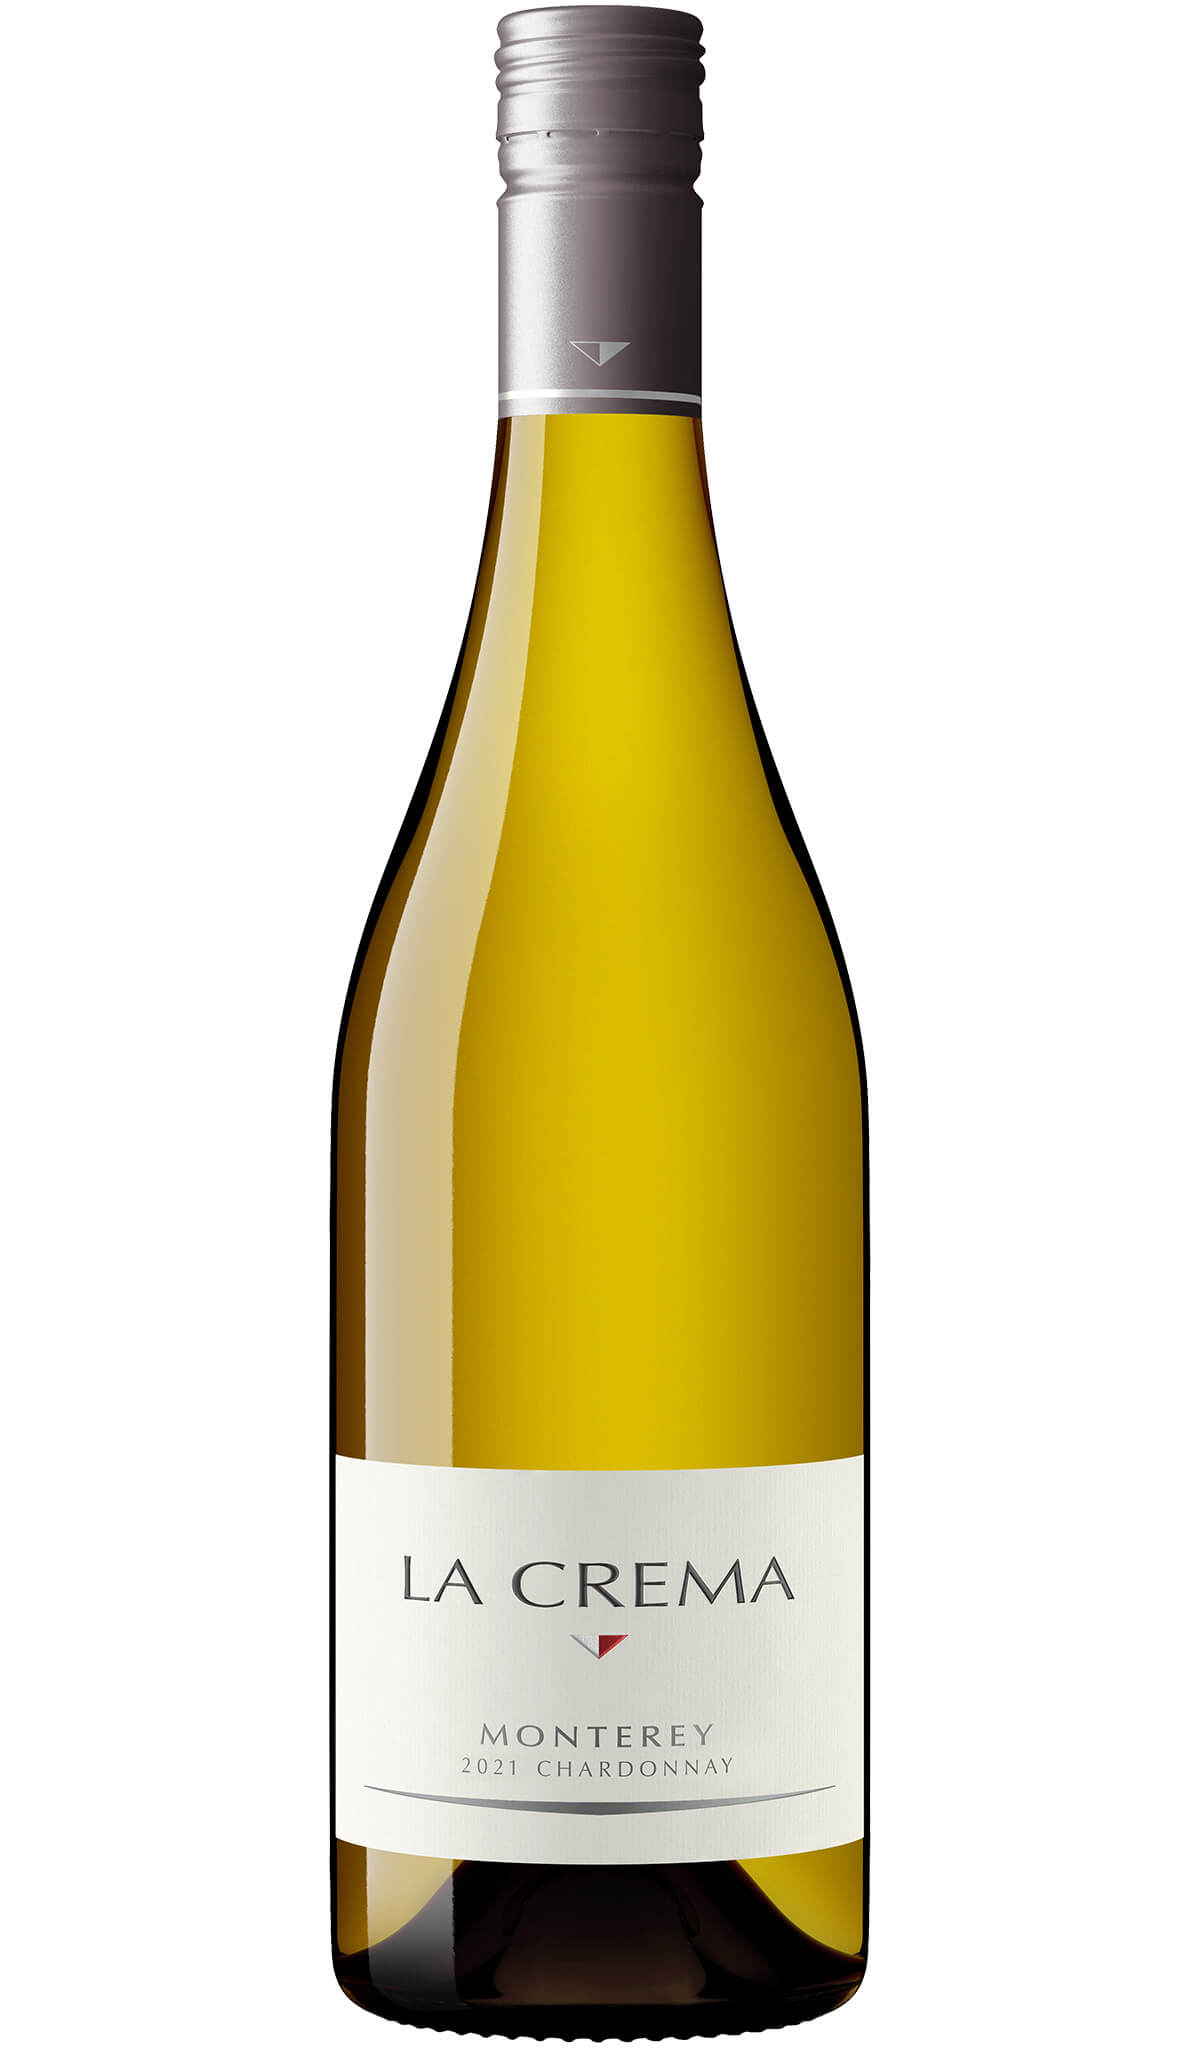 Find out more or purchase La Crema Monterey Chardonnay 2021 (California) online at Wine Sellers Direct - Australia's independent liquor specialists.